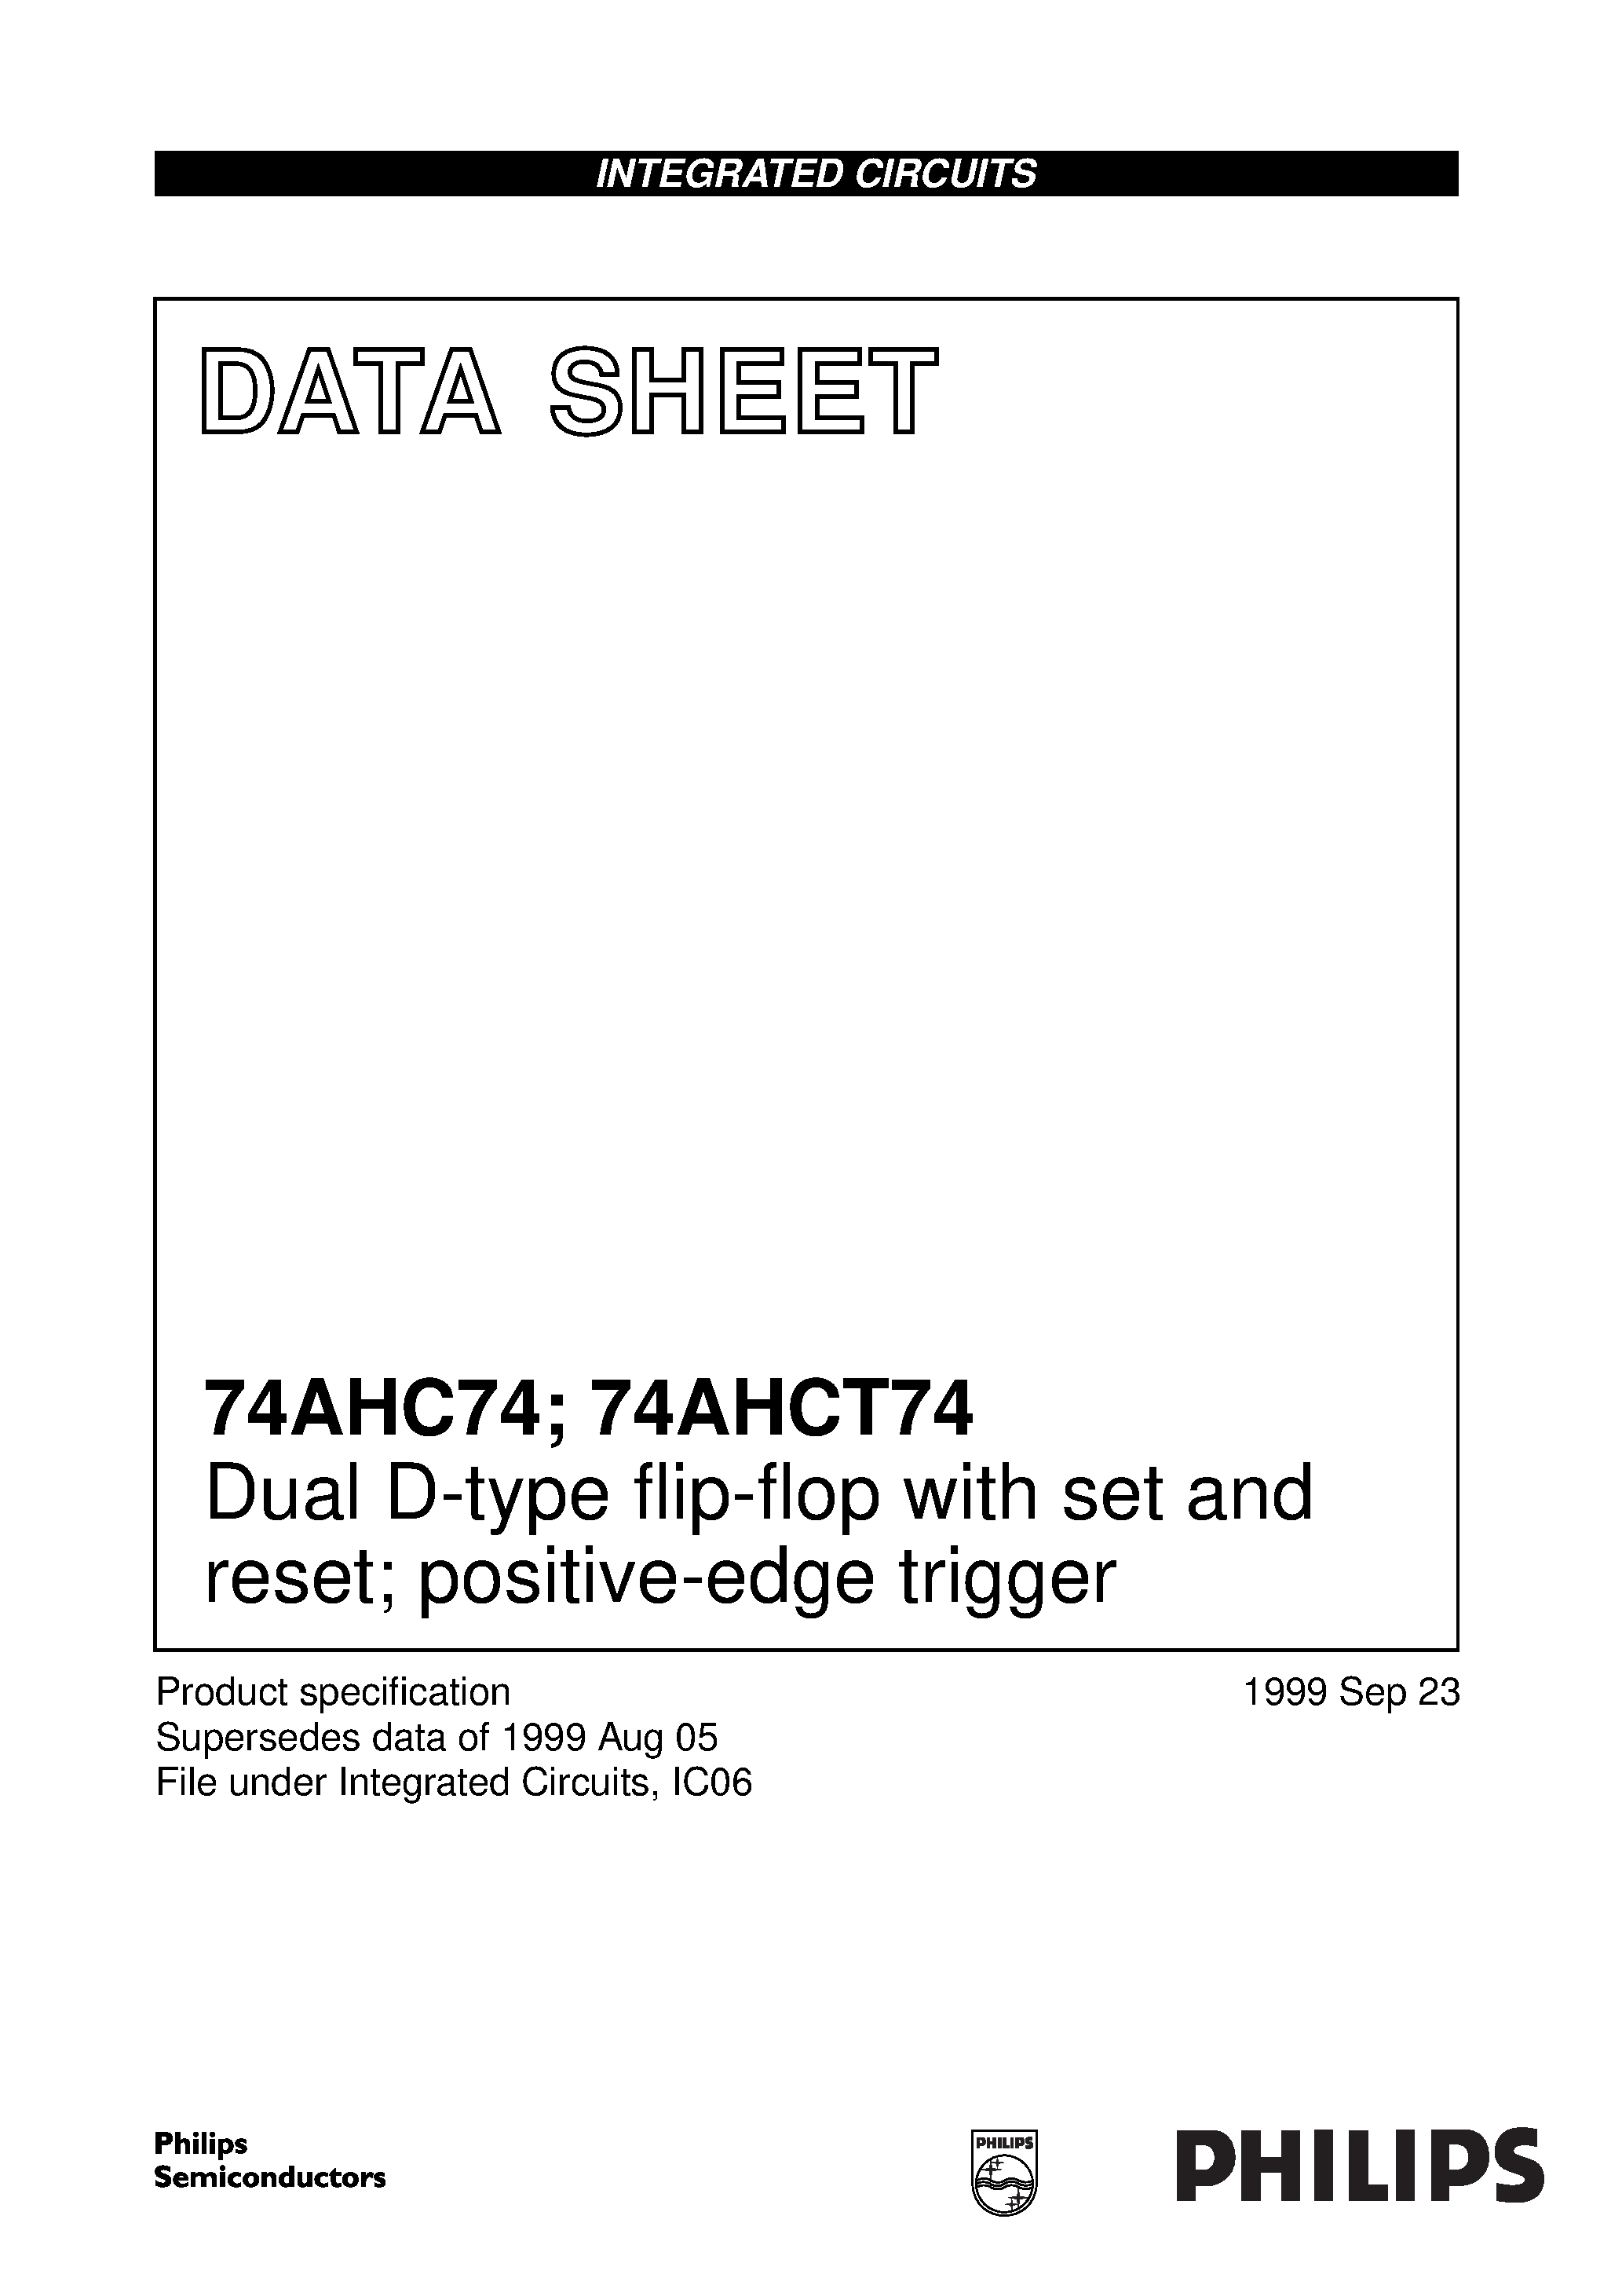 Datasheet 74AHCT74PW - Dual D-type flip-flop with set and reset; positive-edge trigger page 1